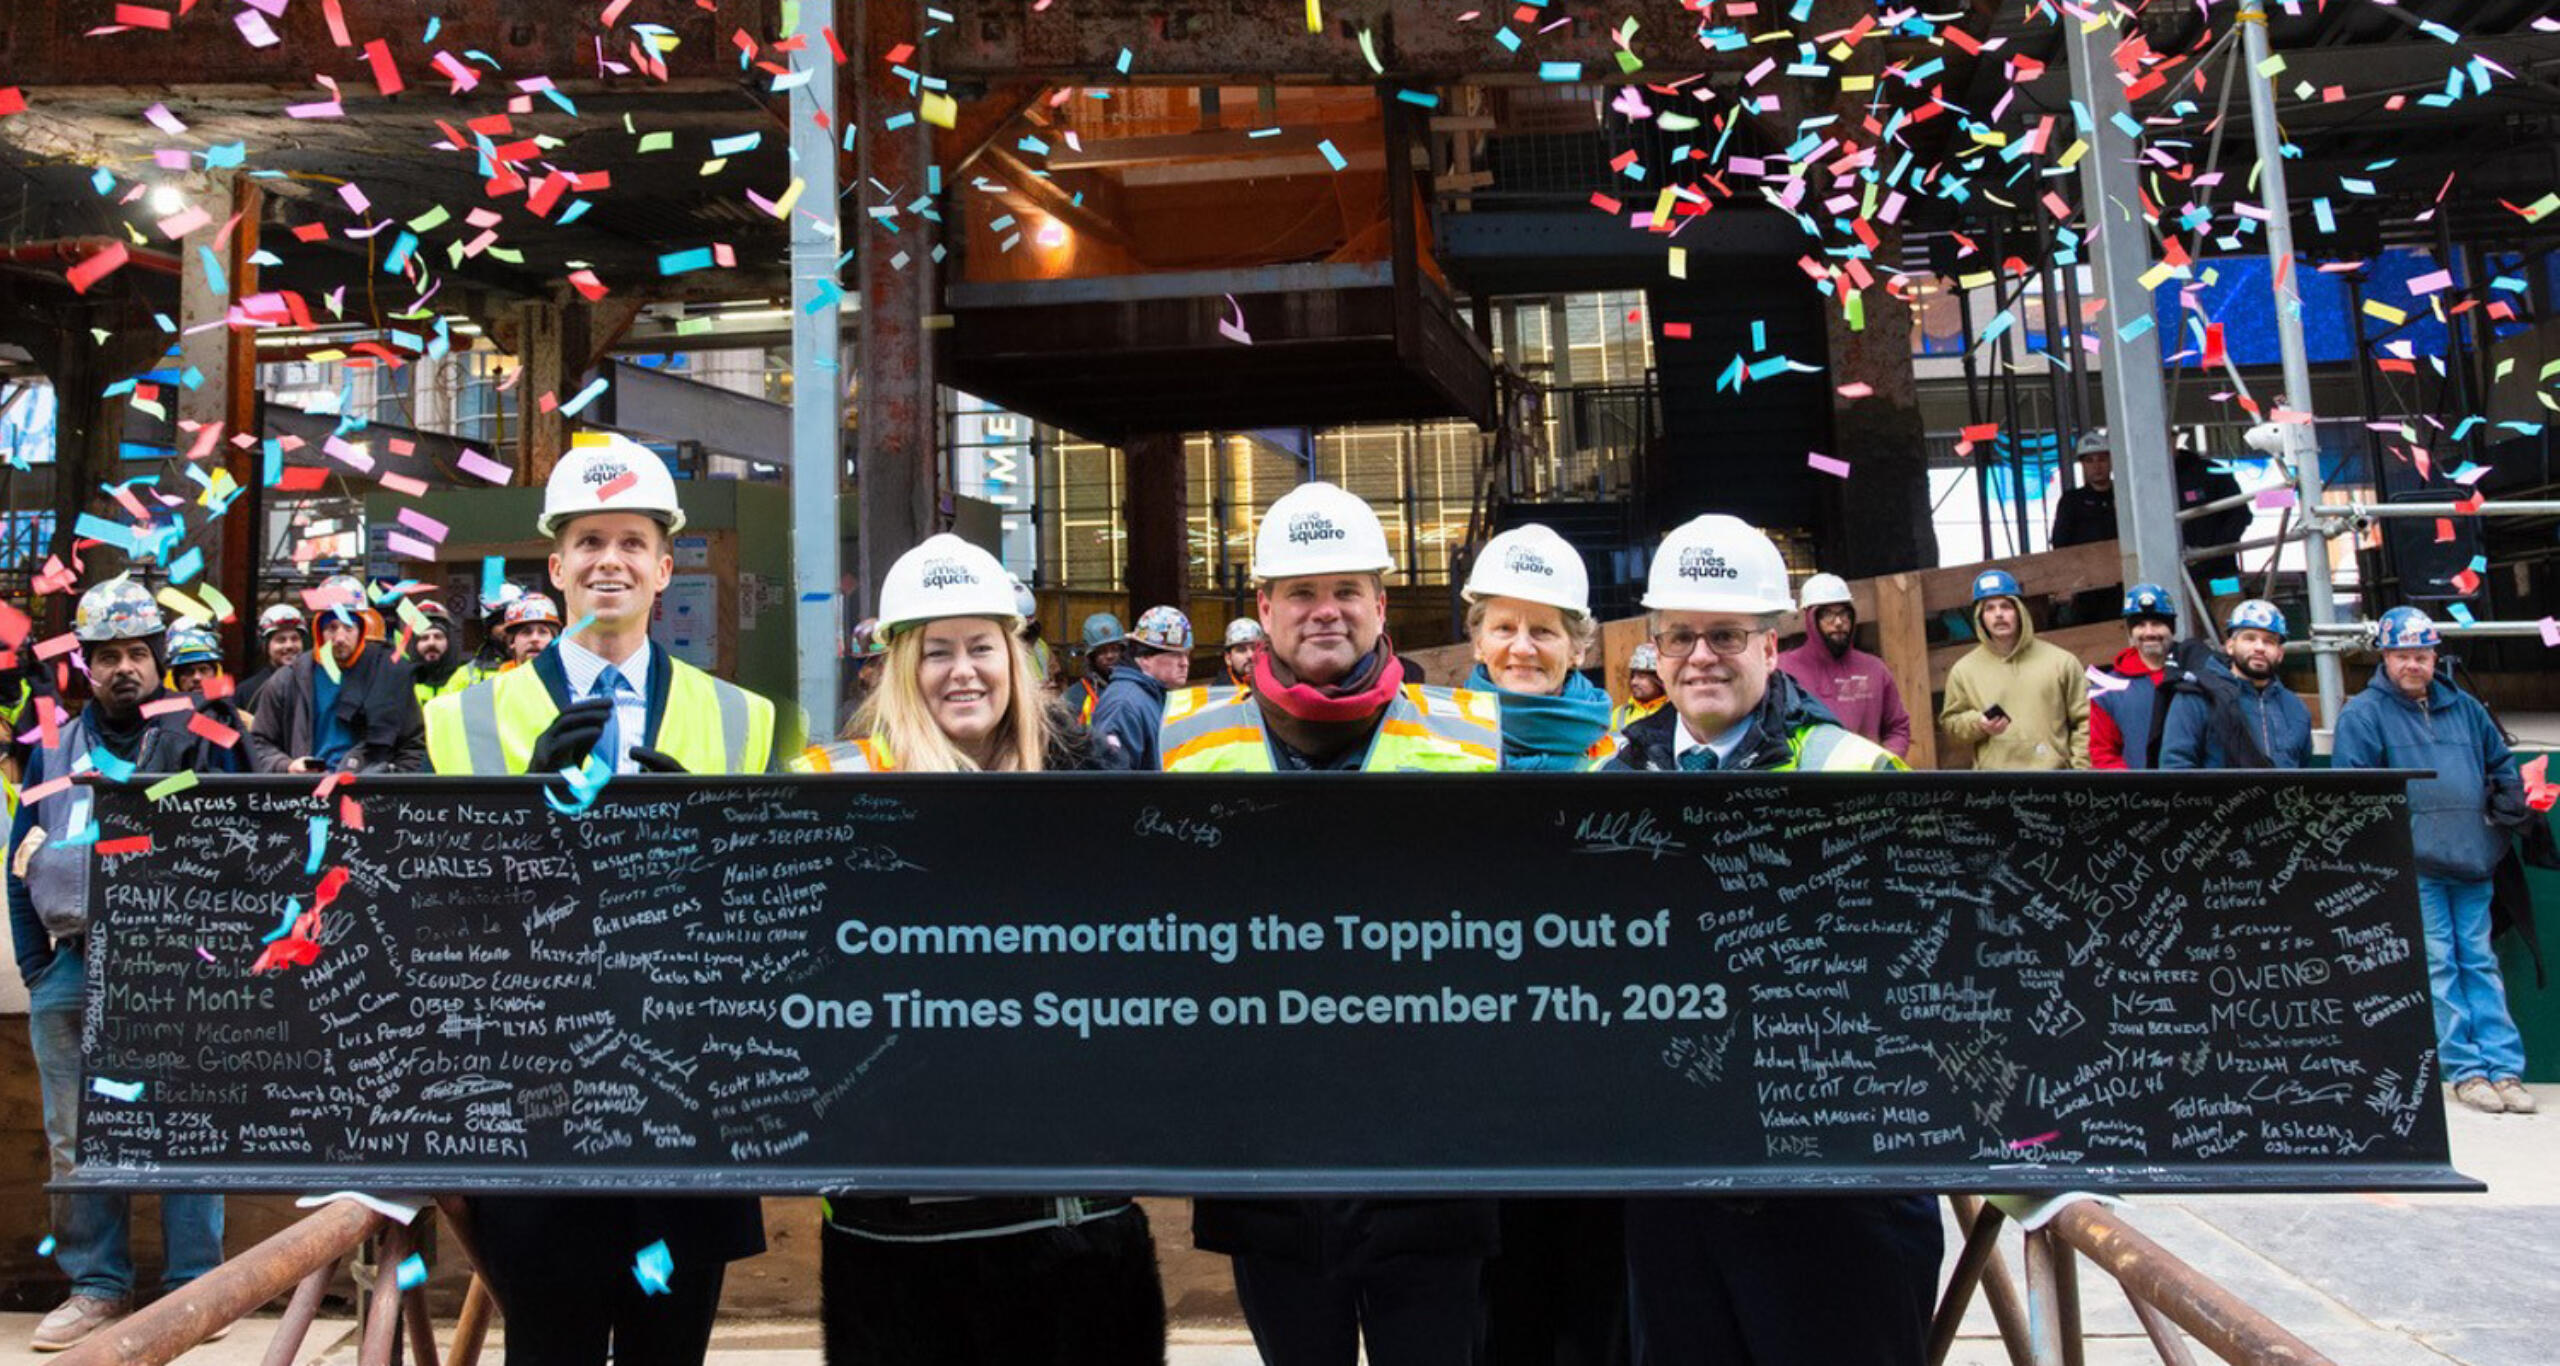 Five people holding a banner that says "commemorating the topping out of One Times Square on December 77th, 2023" with confetti falling in background